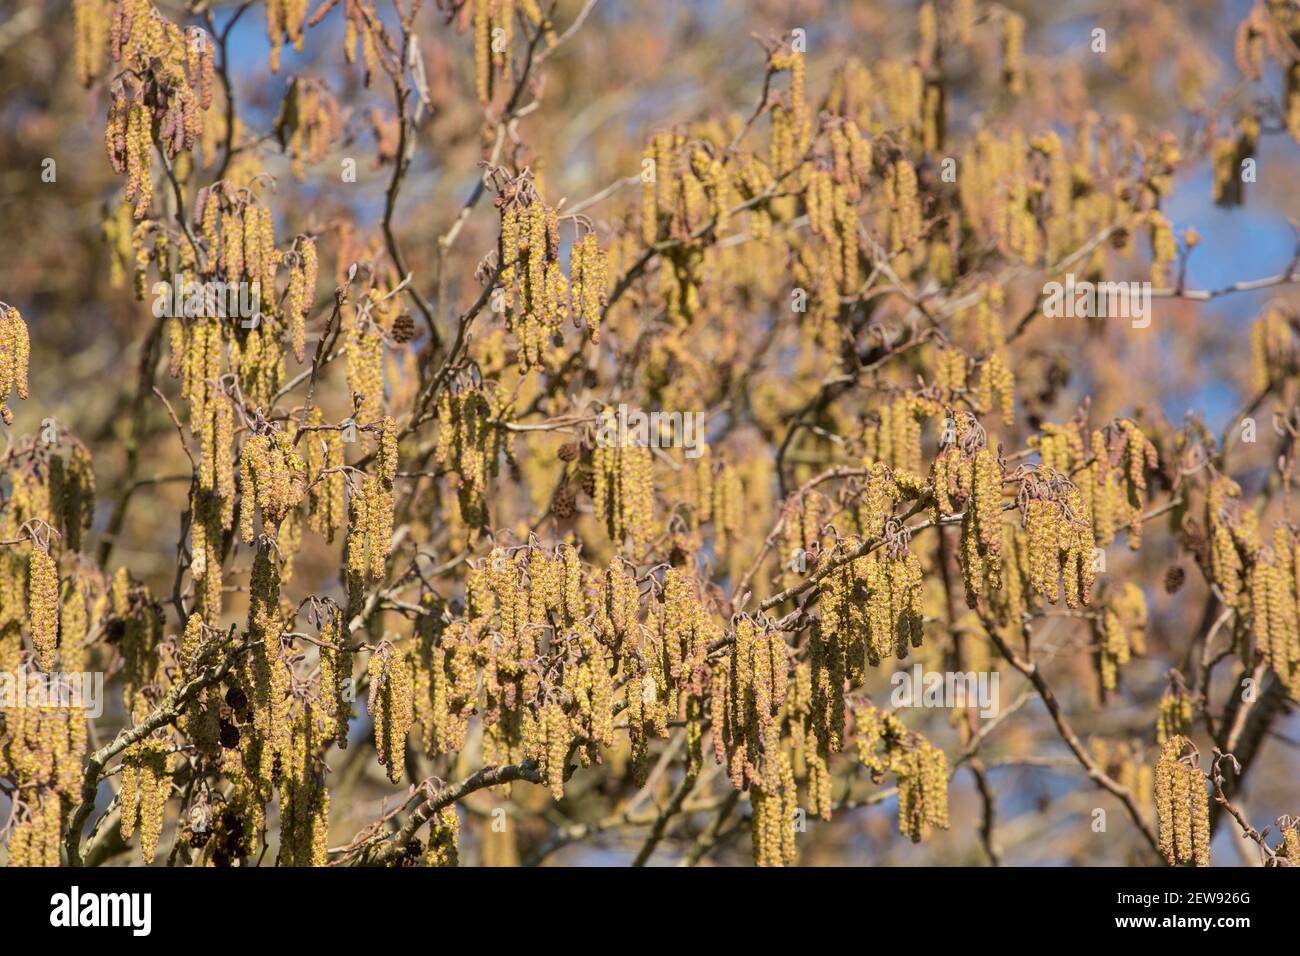 An alder tree, Alnus glutinosa, in February sunshine displaying male catkins. The female flowers grow on the same stems as the male catkins. North Dor Stock Photo